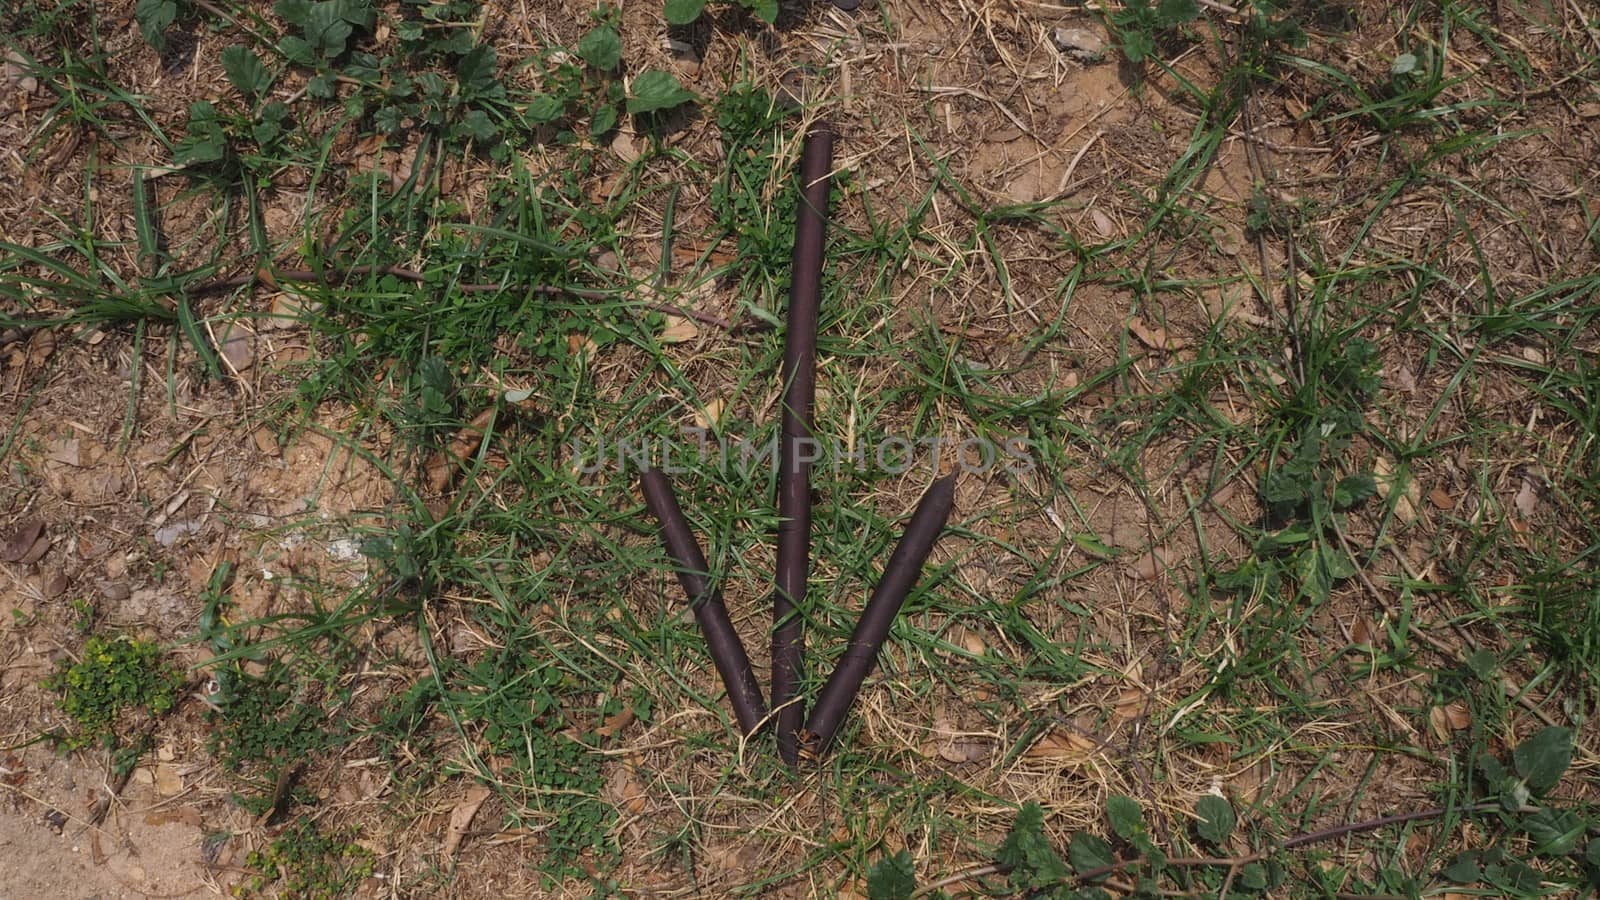 bush craft bushcraft stick arrow pointing down on grass and brown wooden sticks survival military sign signal